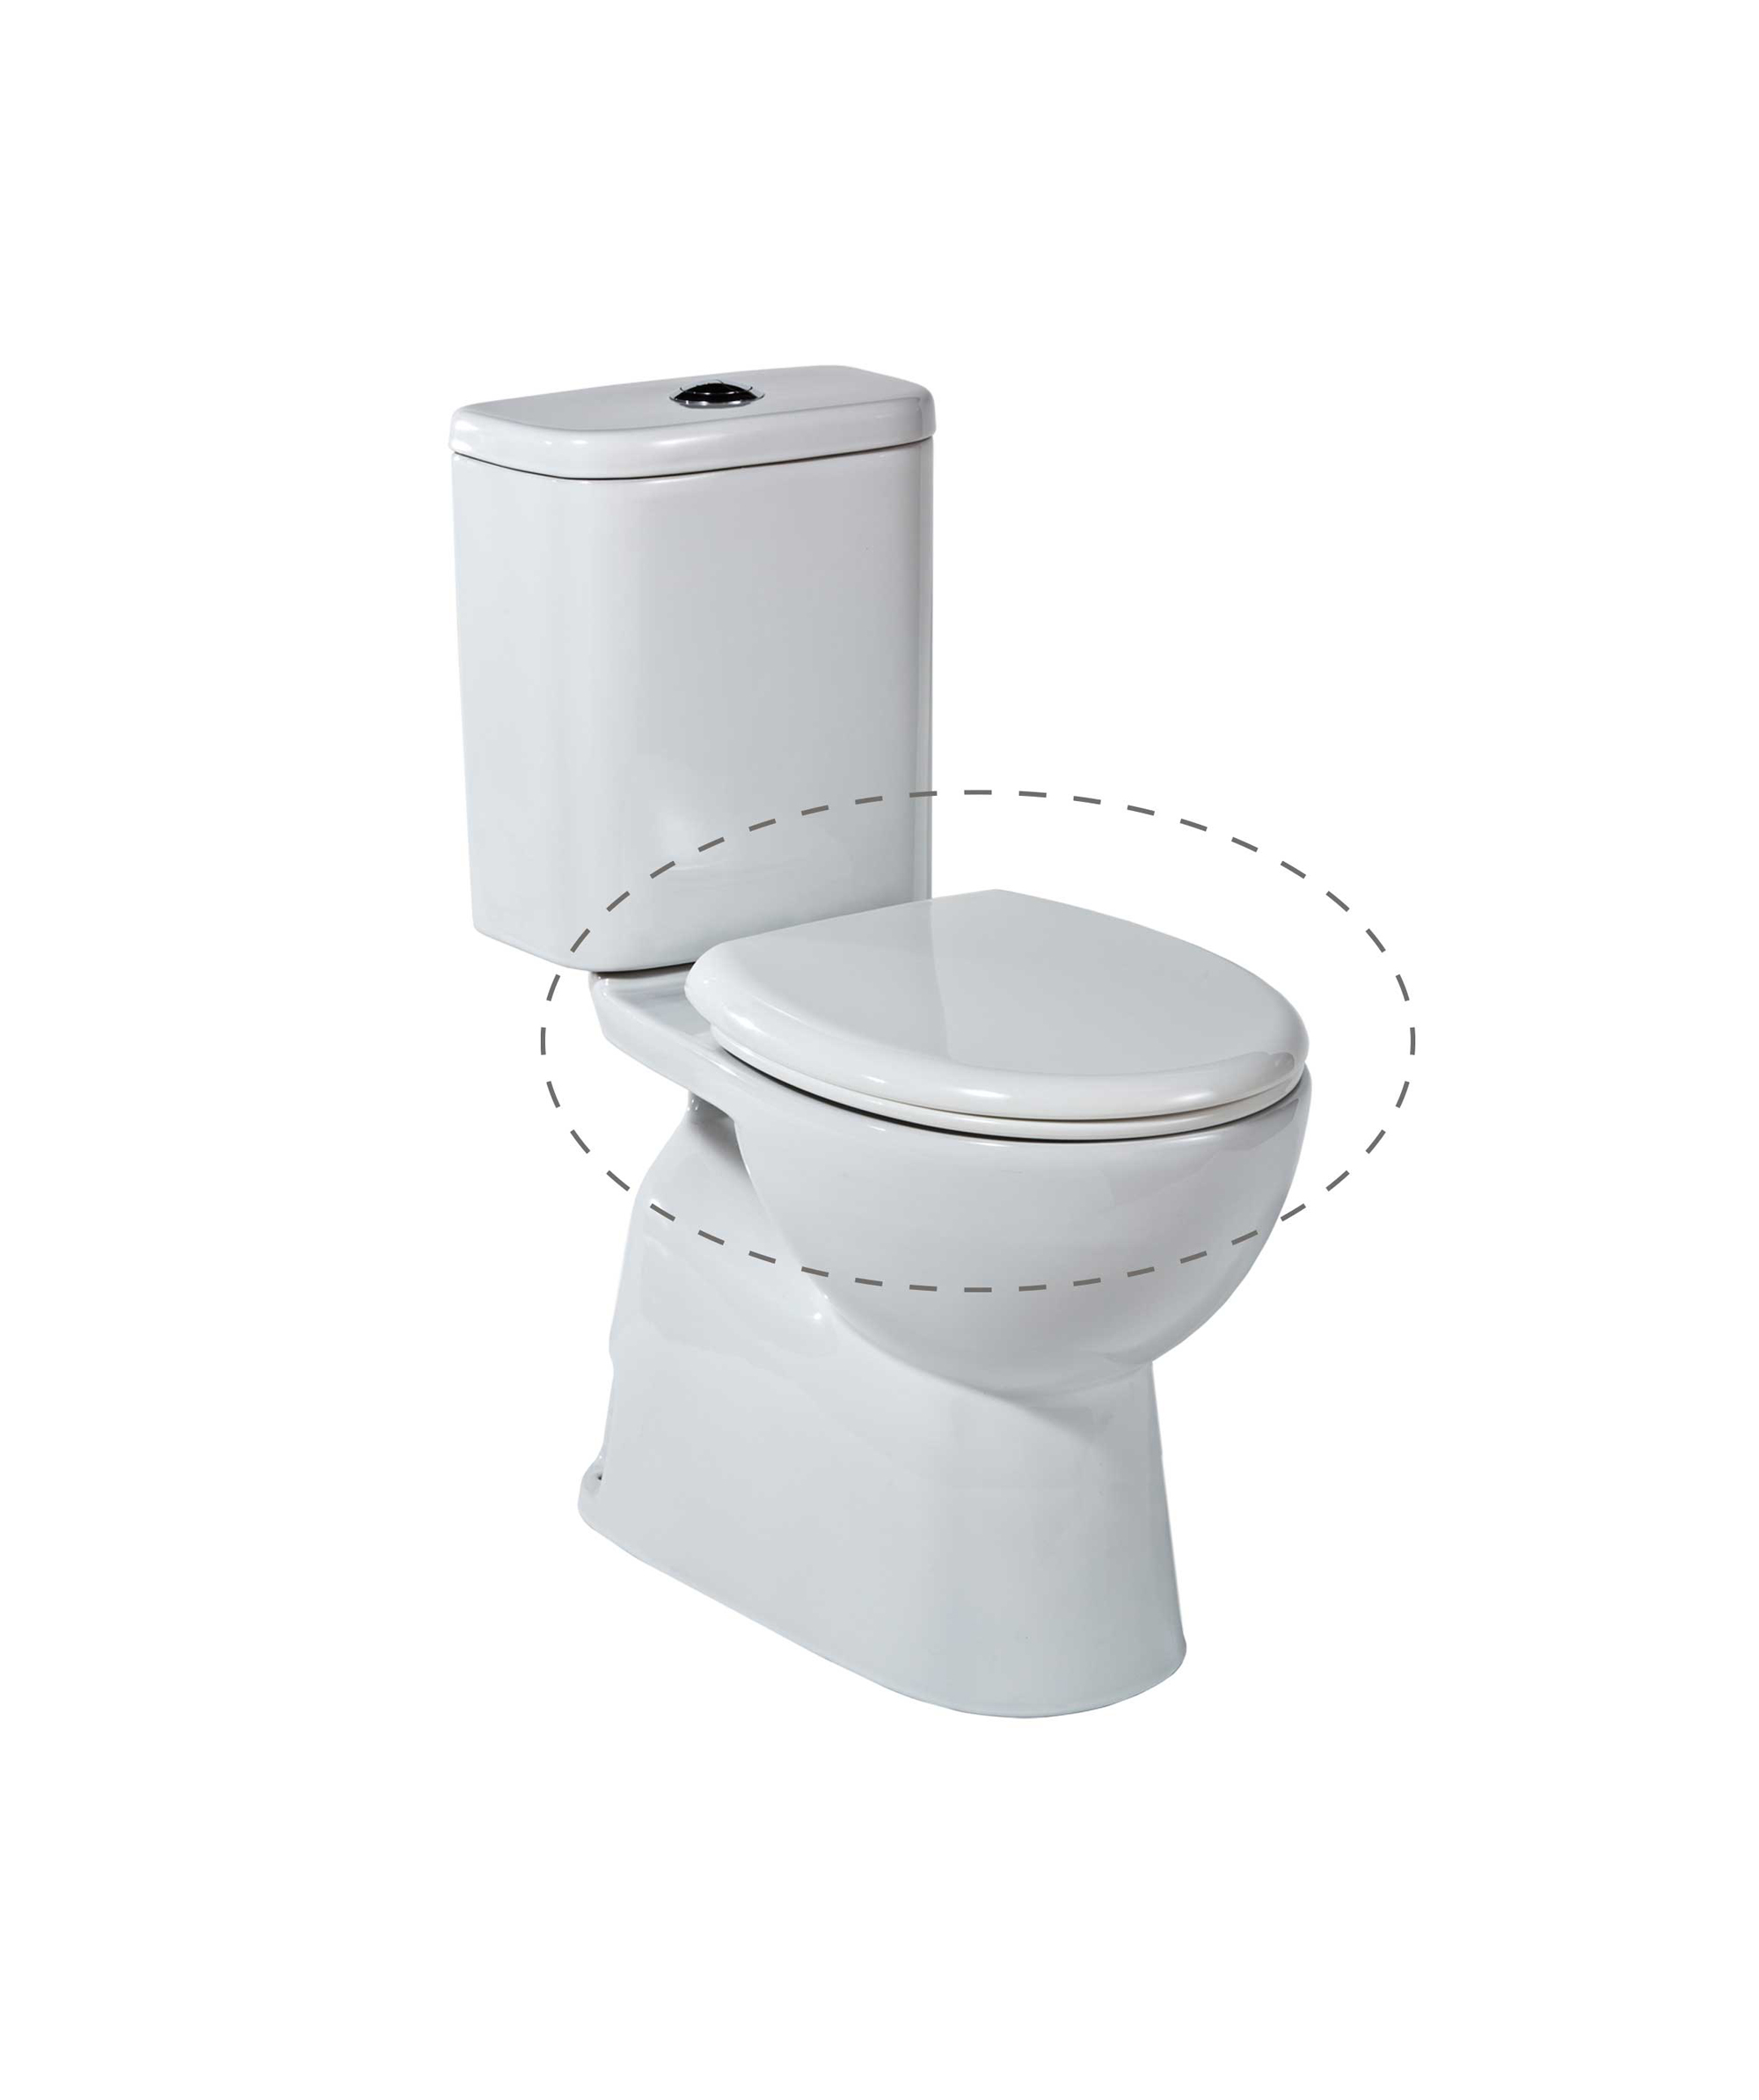 Toilet seat for Syros Select Close Coupled